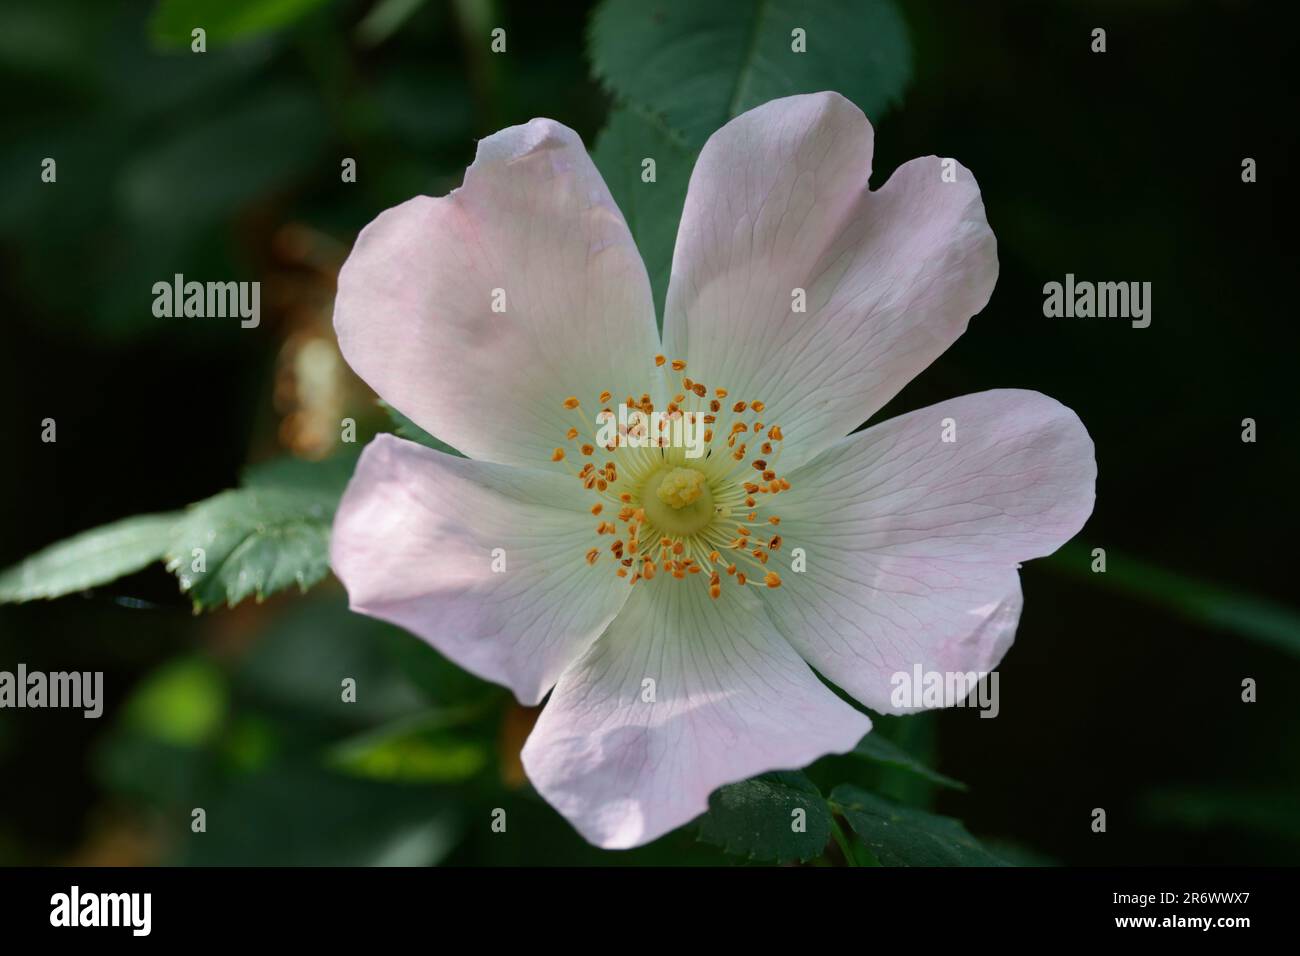 Dog rose Rosa canina, common wild rose has flat flowers large pink flushed petals numerouse yellow stamens with thorny stems and toothed leaves Stock Photo